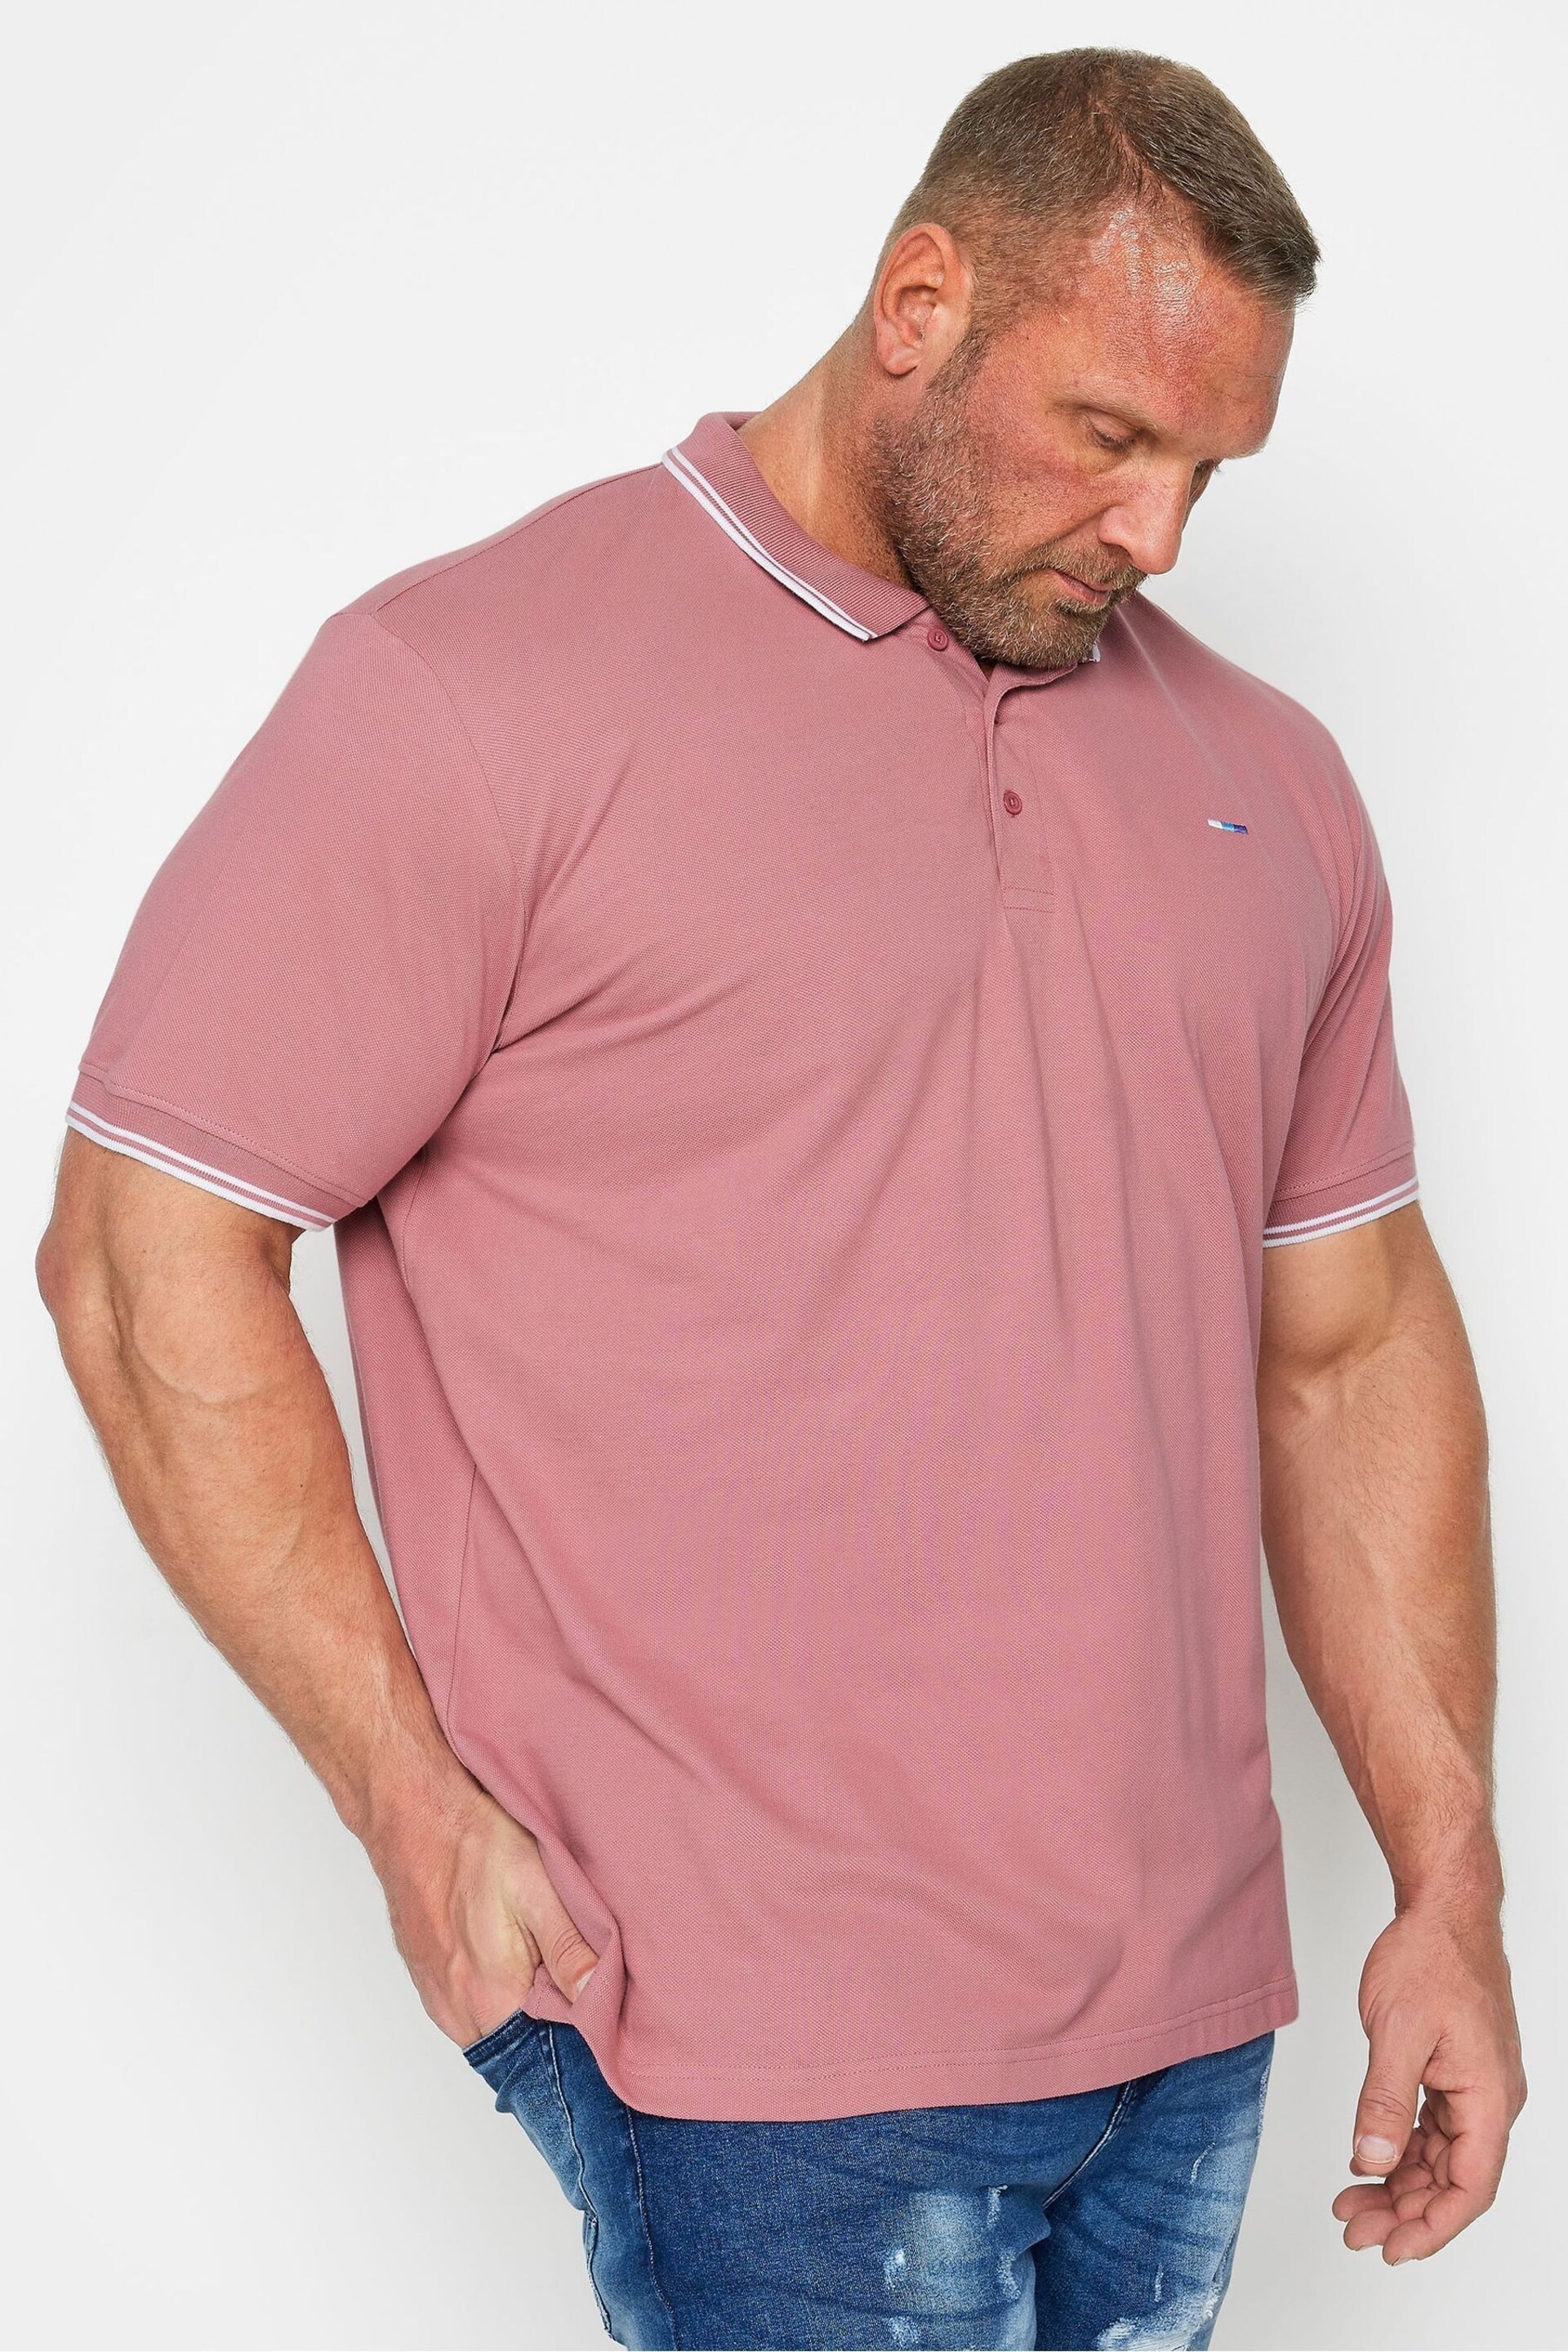 BadRhino Big & Tall Mineral Blue/Rose Pink/Violet Purple 3 Pack Tipped Polo Shirts - Image 3 of 7